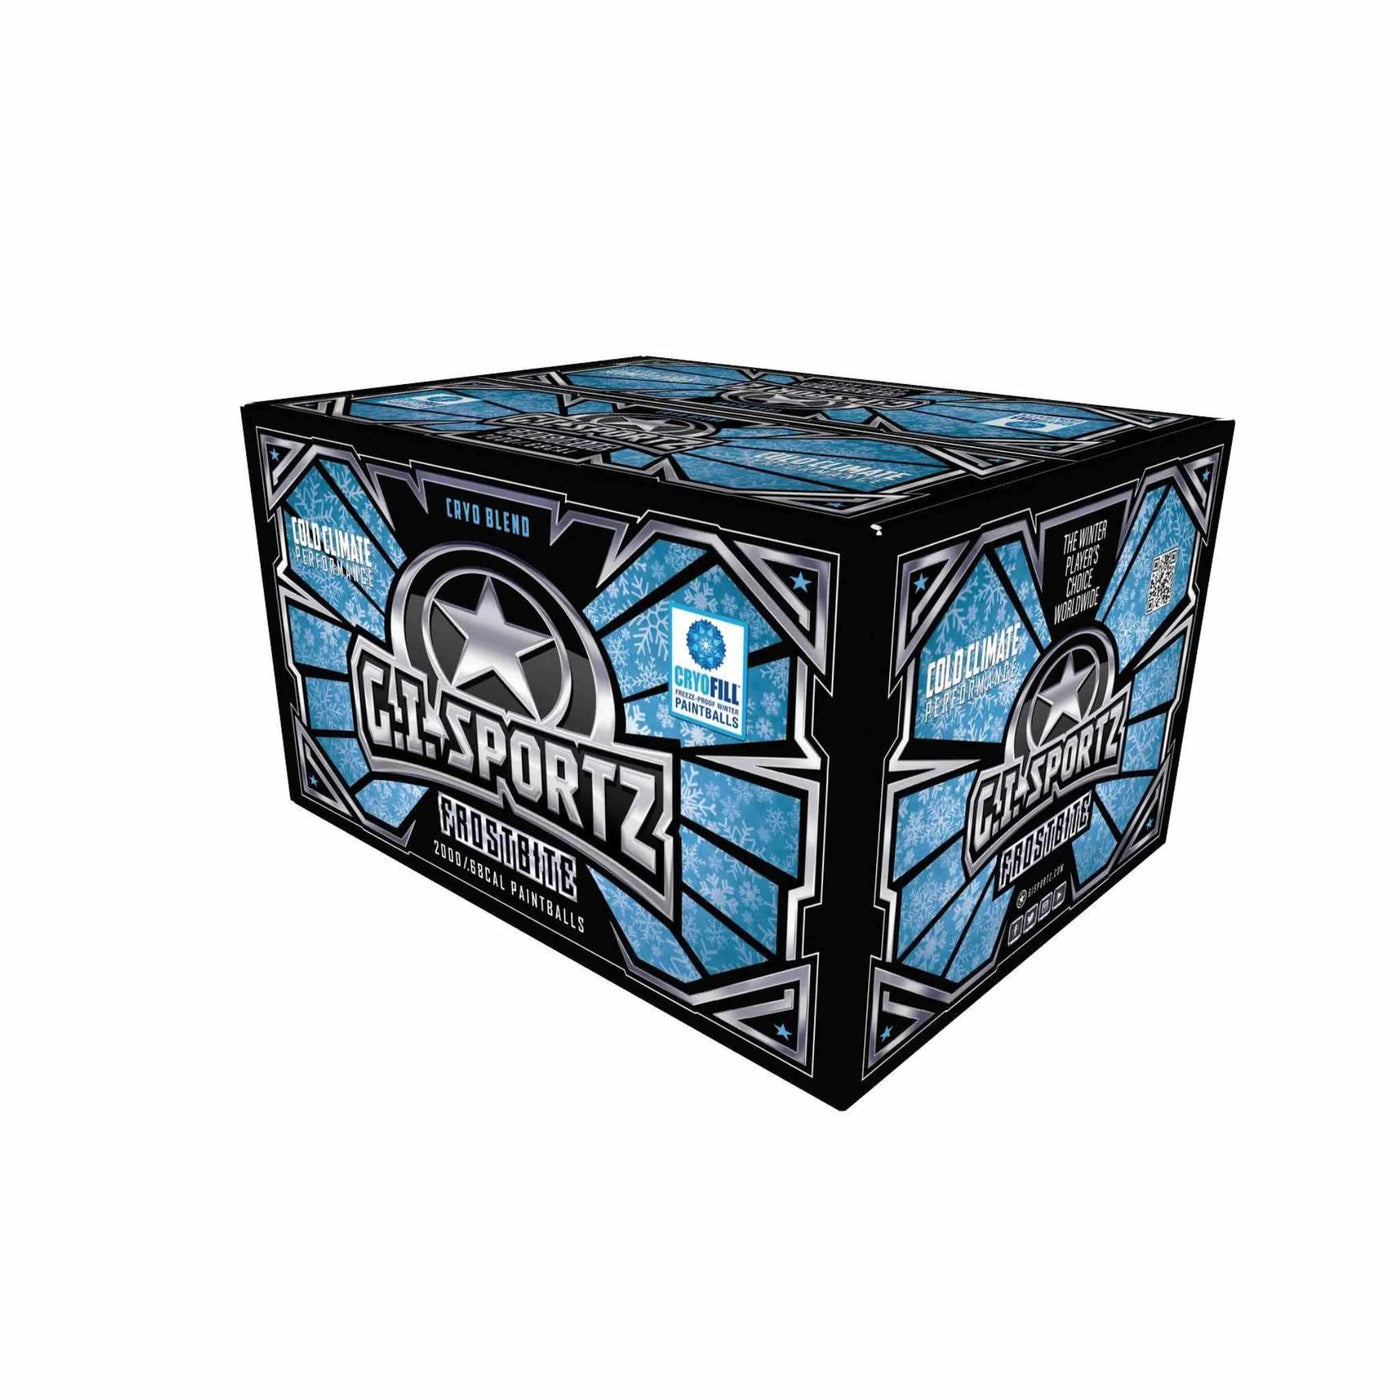 Gi Sports Frostbite  .68 Cal Paintballs - Box of 2000